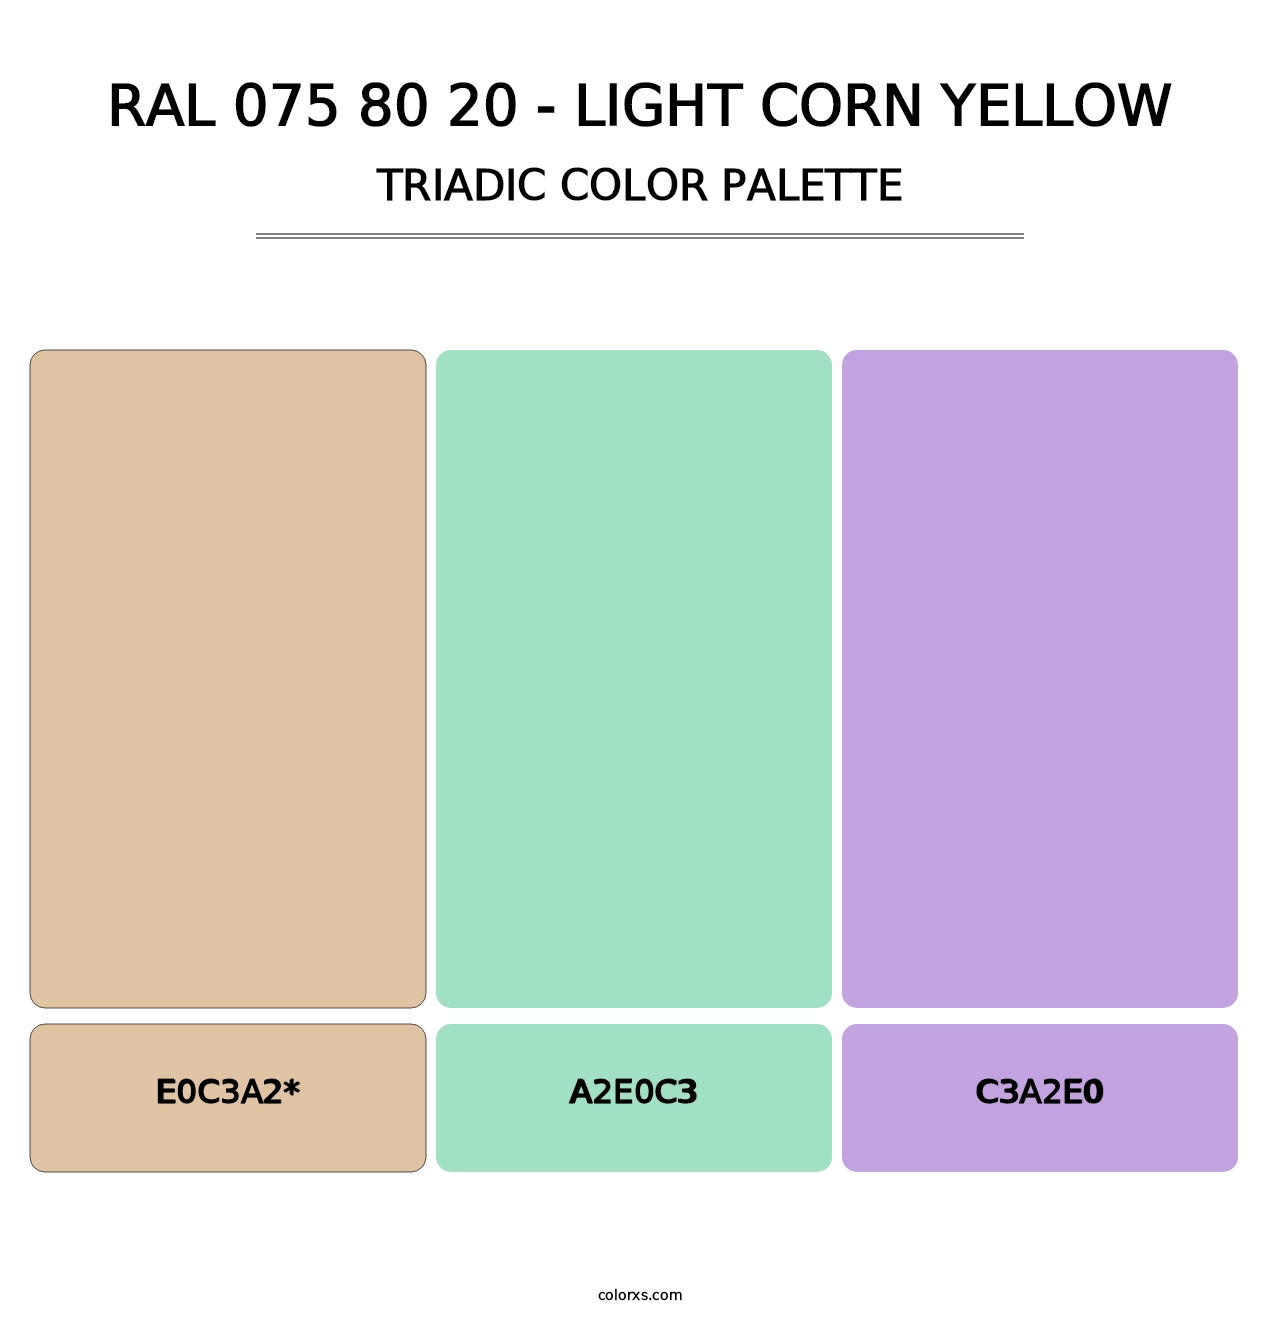 RAL 075 80 20 - Light Corn Yellow - Triadic Color Palette